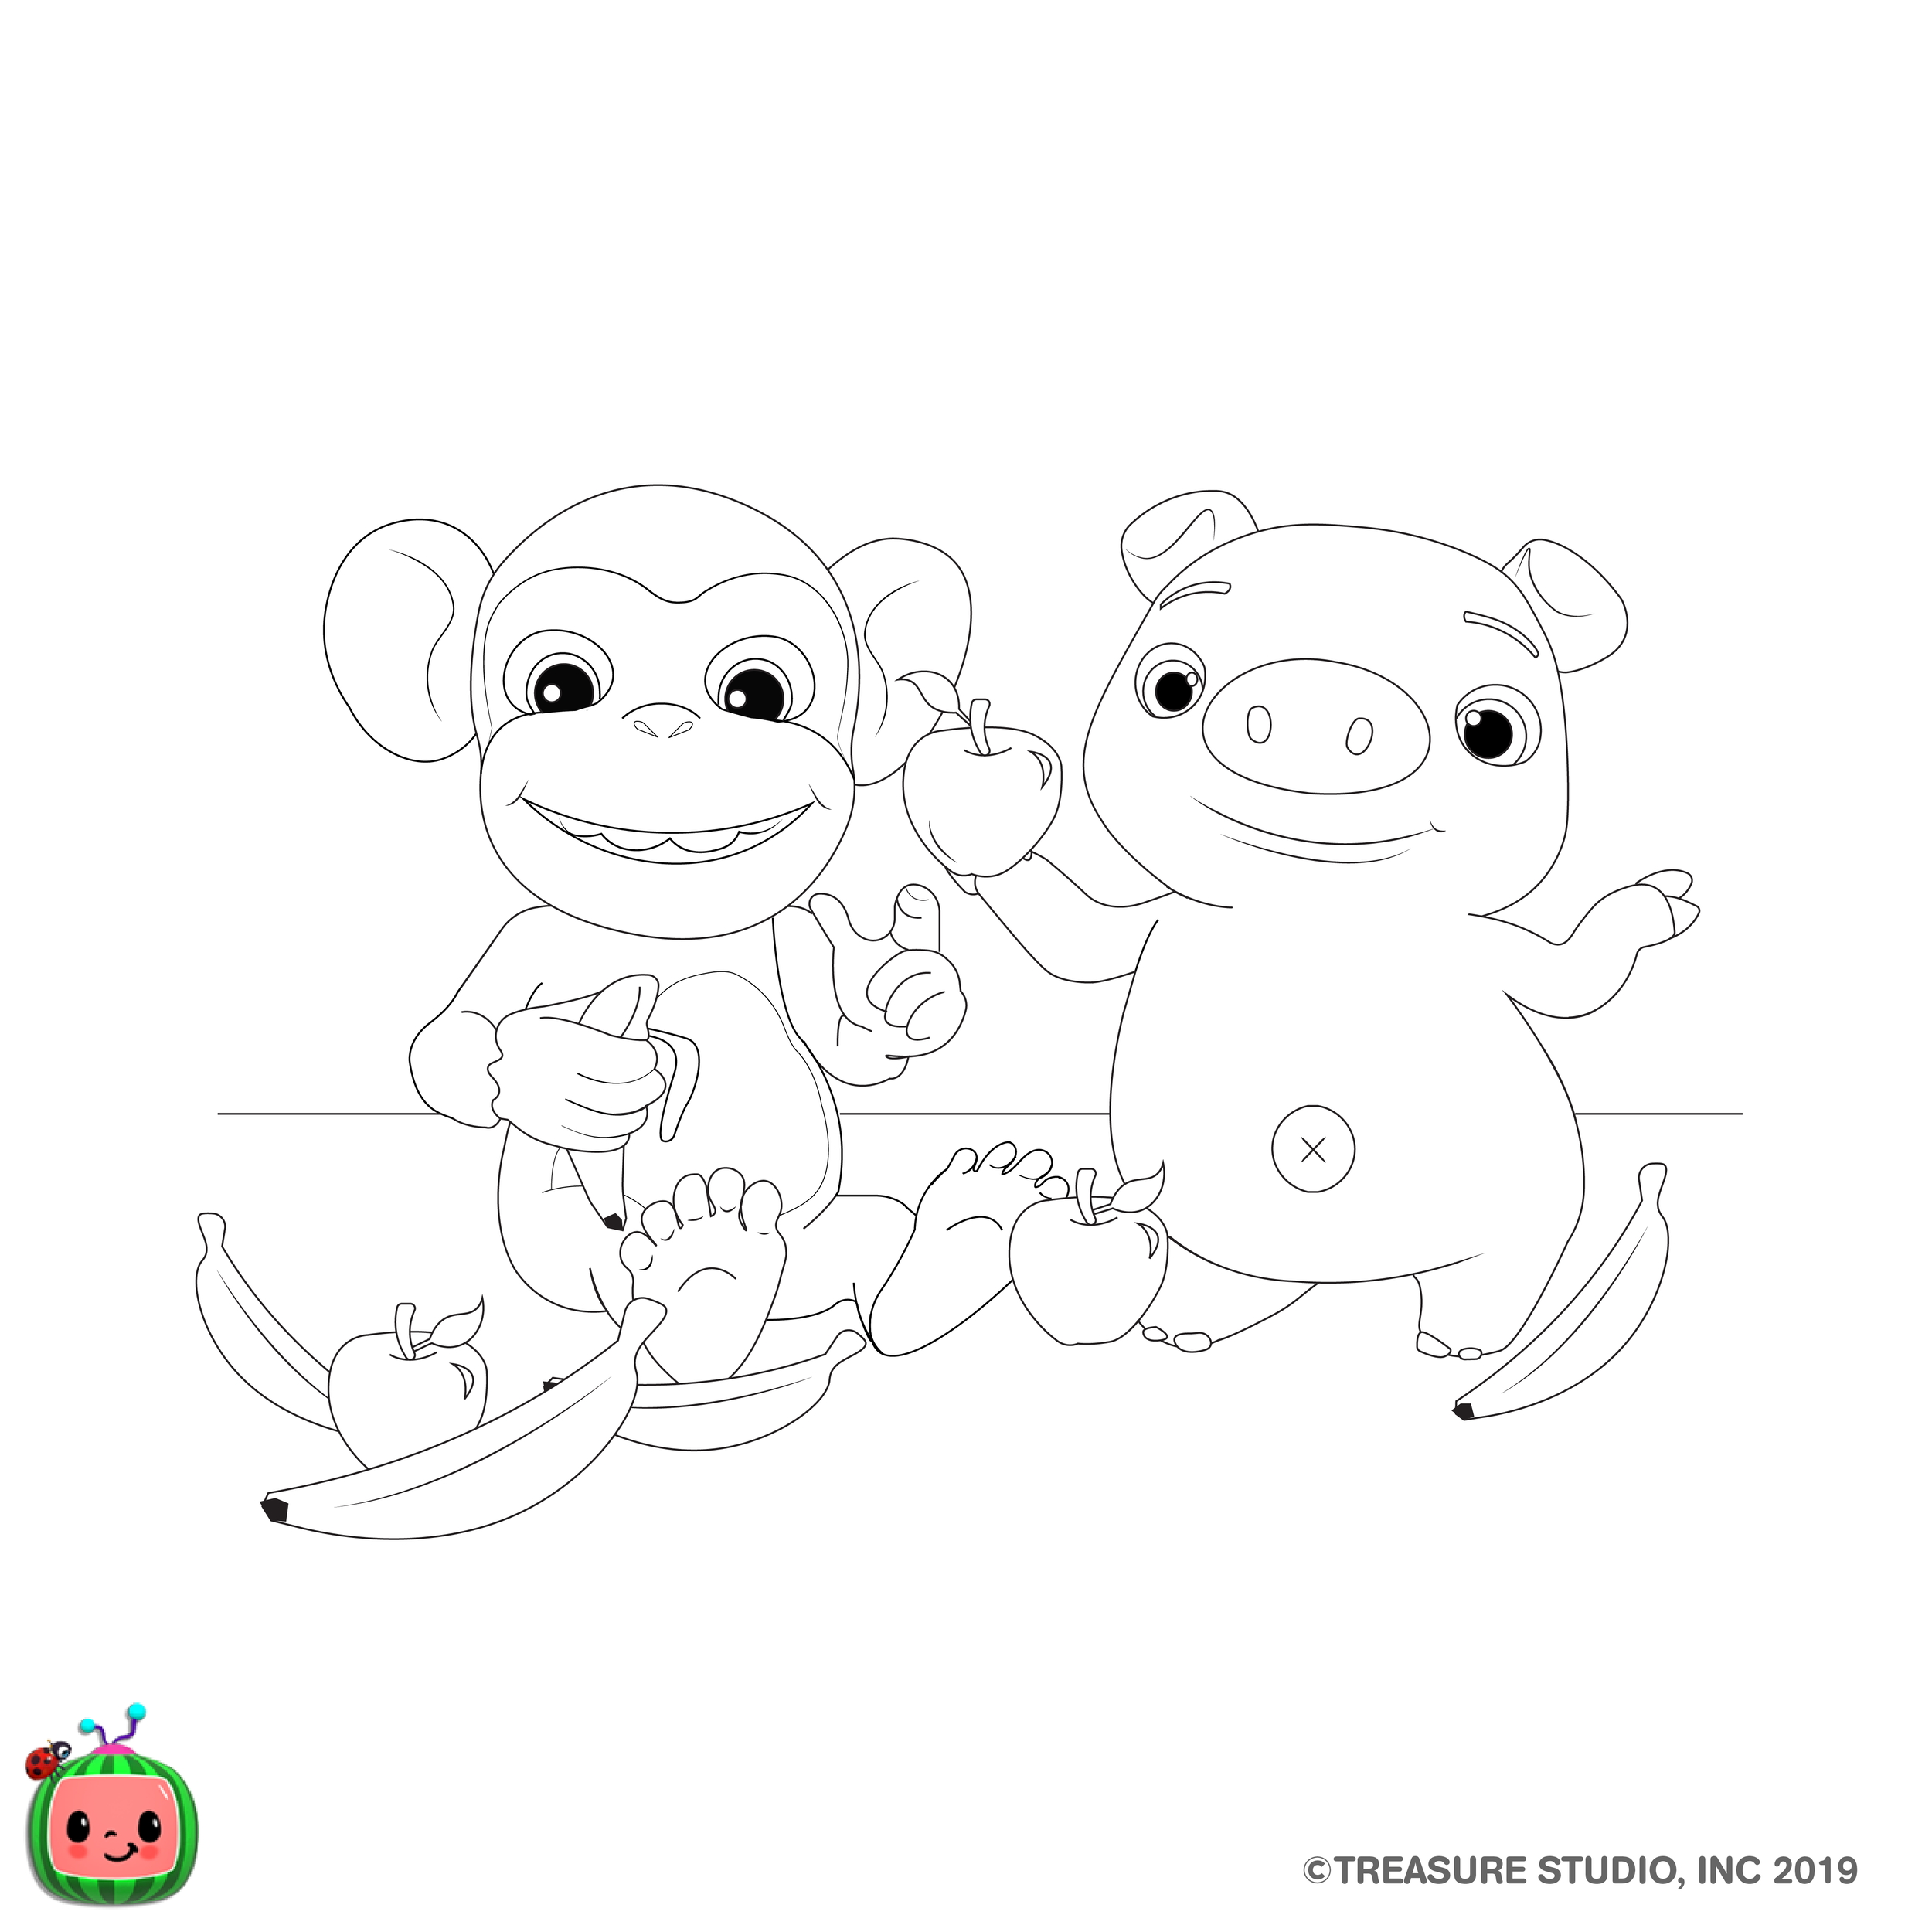 Cocomelon Coloring Pages | Coloring Page Blog